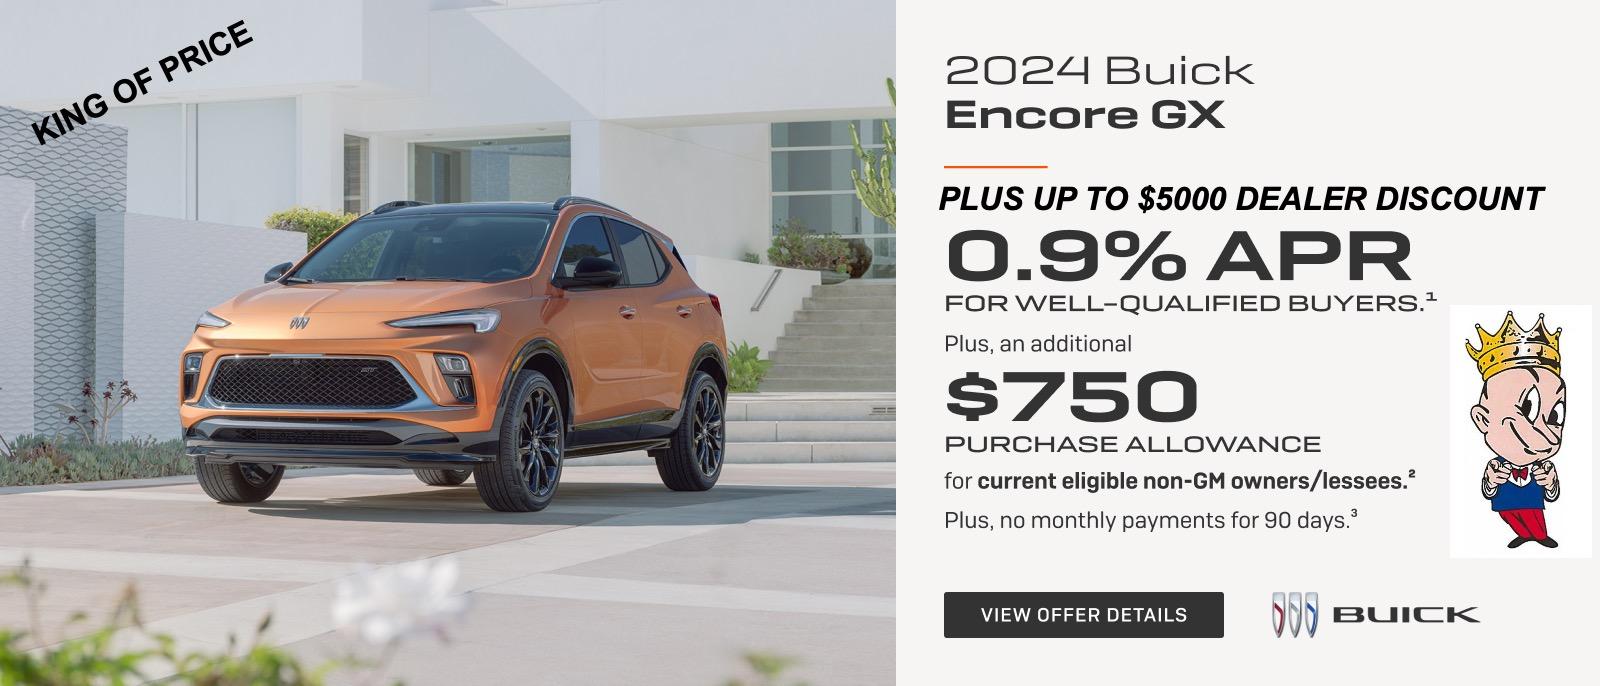 0.9% APR 
FOR WELL-QUALIFIED BUYERS.1

Plus, an additional $750 PURCHASE ALLOWANCE for current eligible non-GM owners/lessees.2

Plus, no monthly payments for 90 days.3